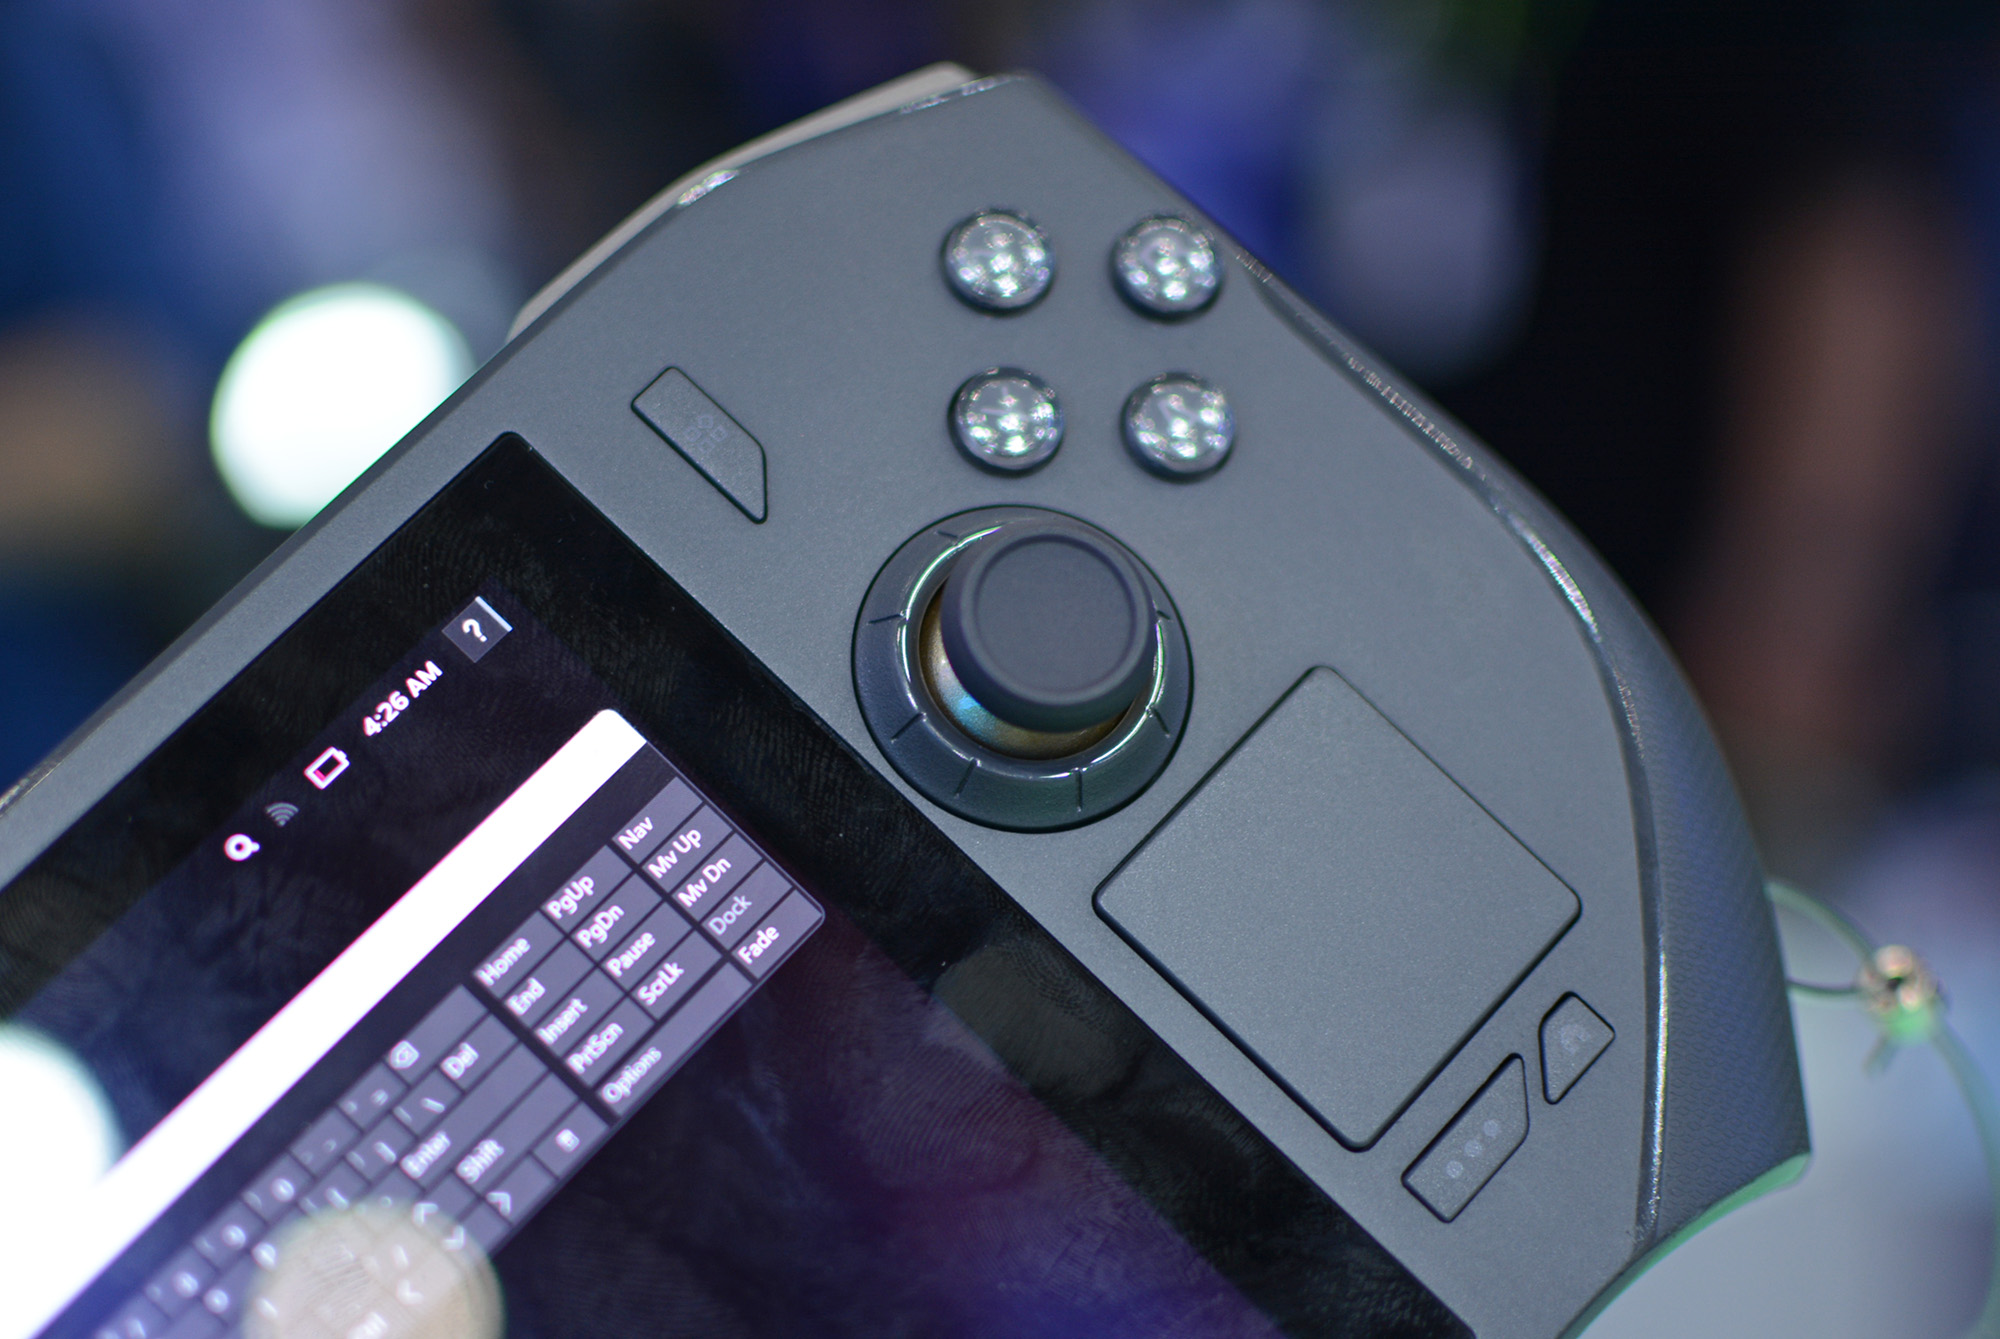 The right-side joystick, ABXY keys and other buttons on the Zotac Zone handheld gaming console.